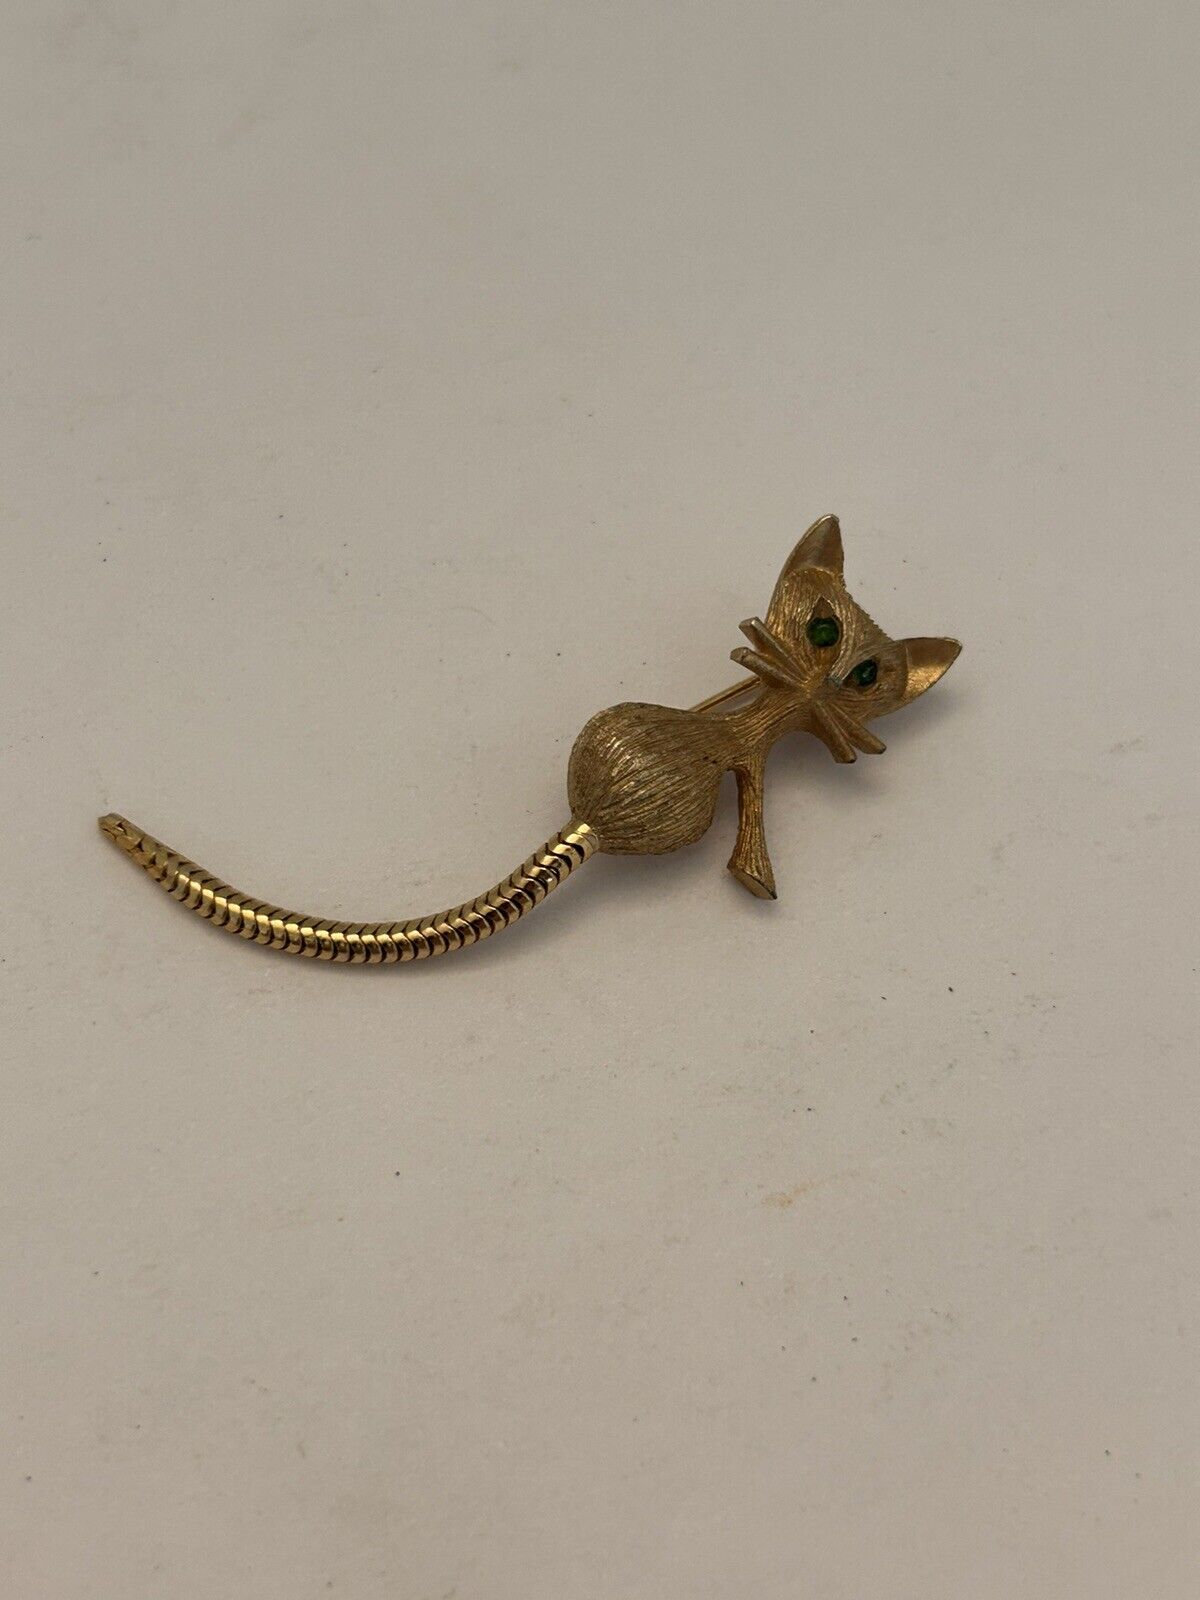 Unique Mid Century Cat Pin Costume Jewelry With Flexible Tail Gold Tones